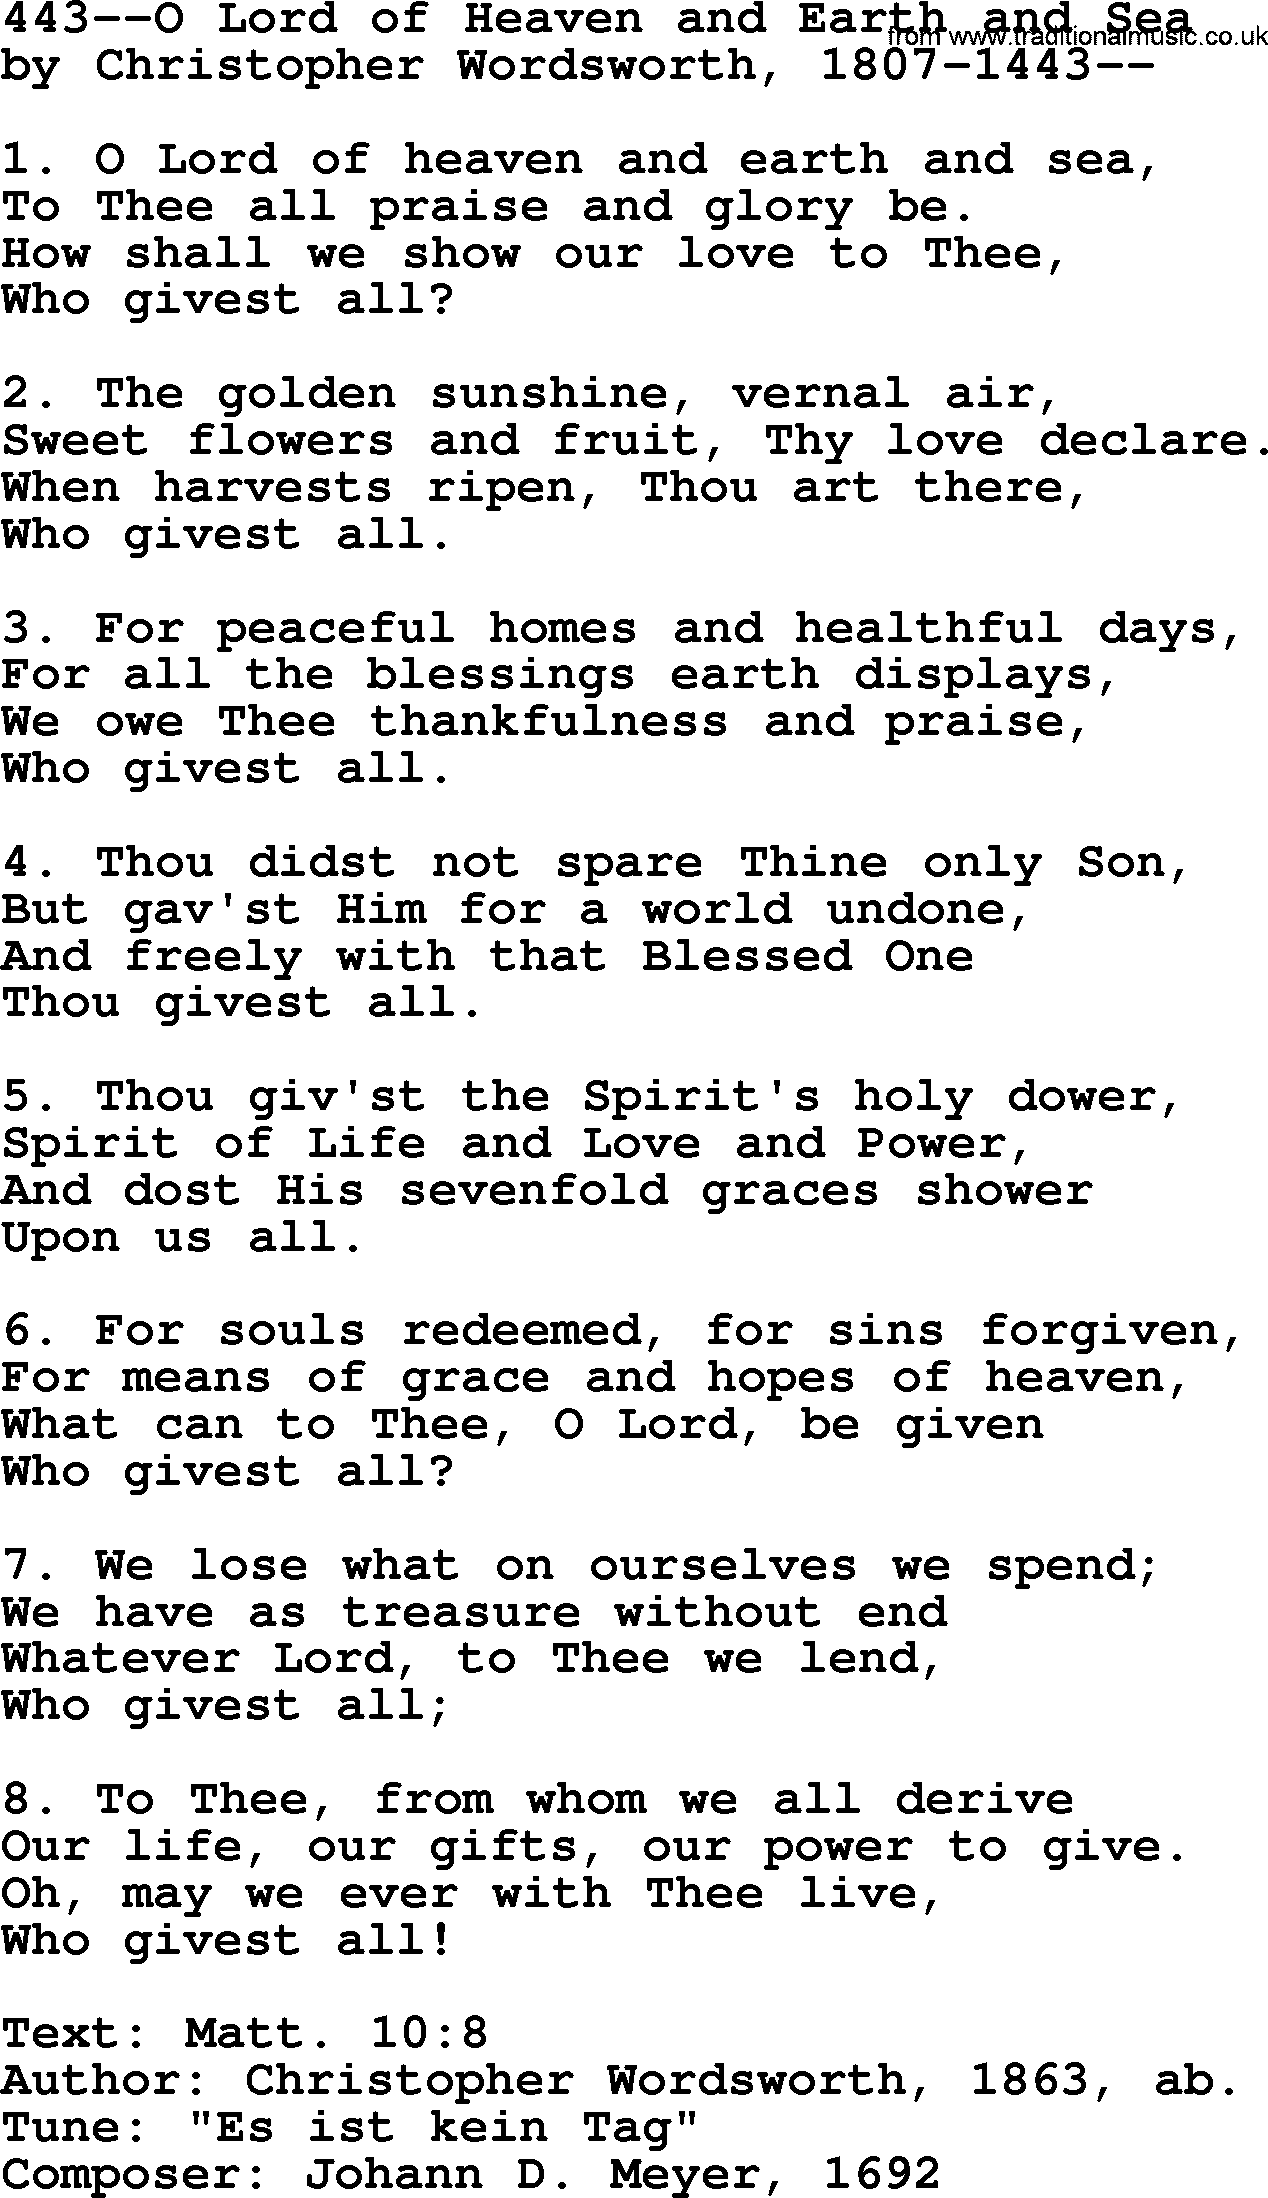 Lutheran Hymn: 443--O Lord of Heaven and Earth and Sea.txt lyrics with PDF